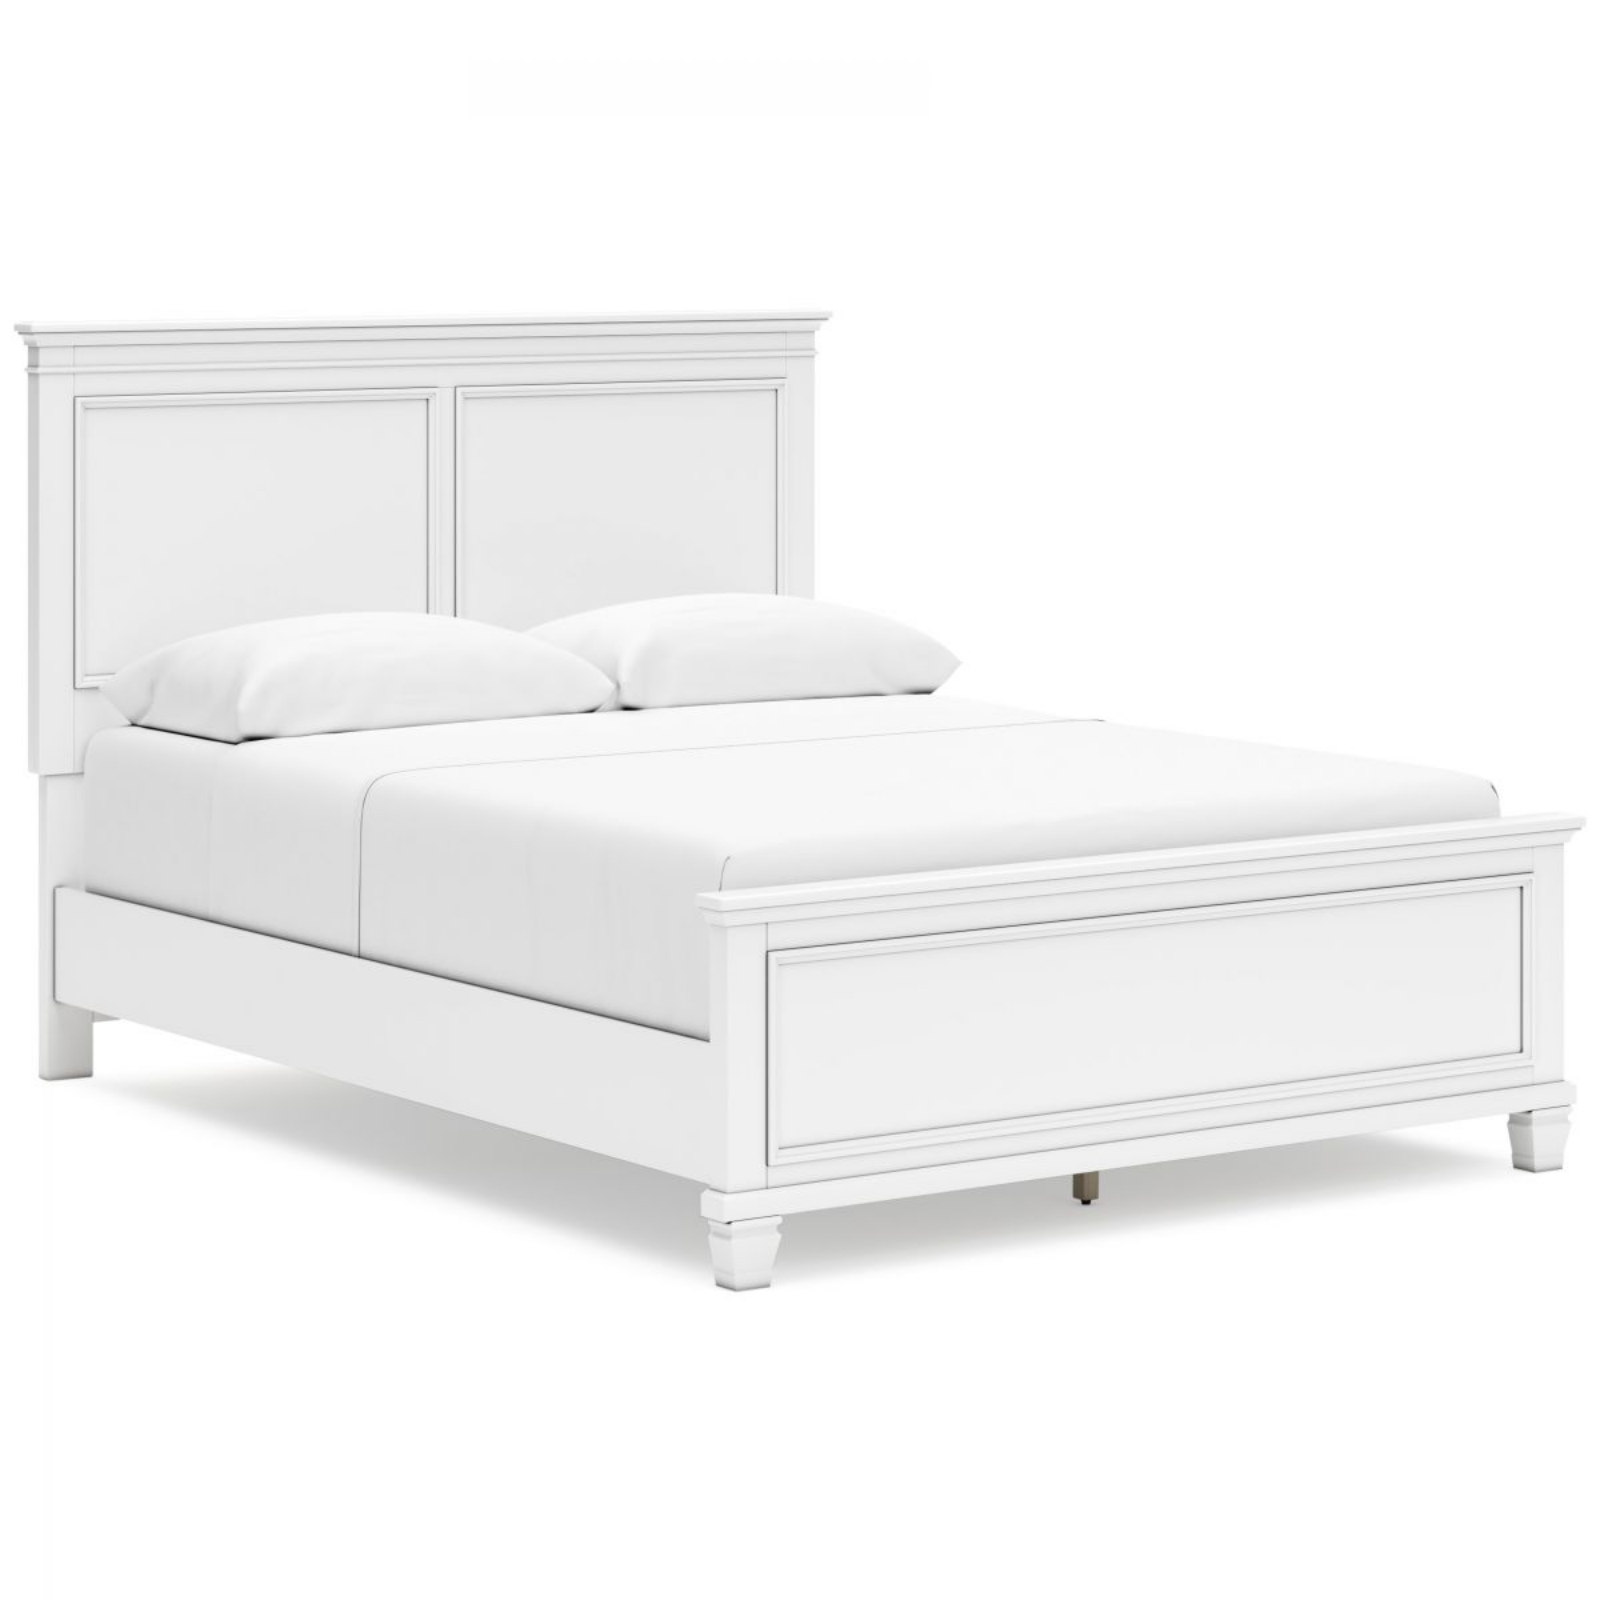 Picture of Fortman Queen Size Bed